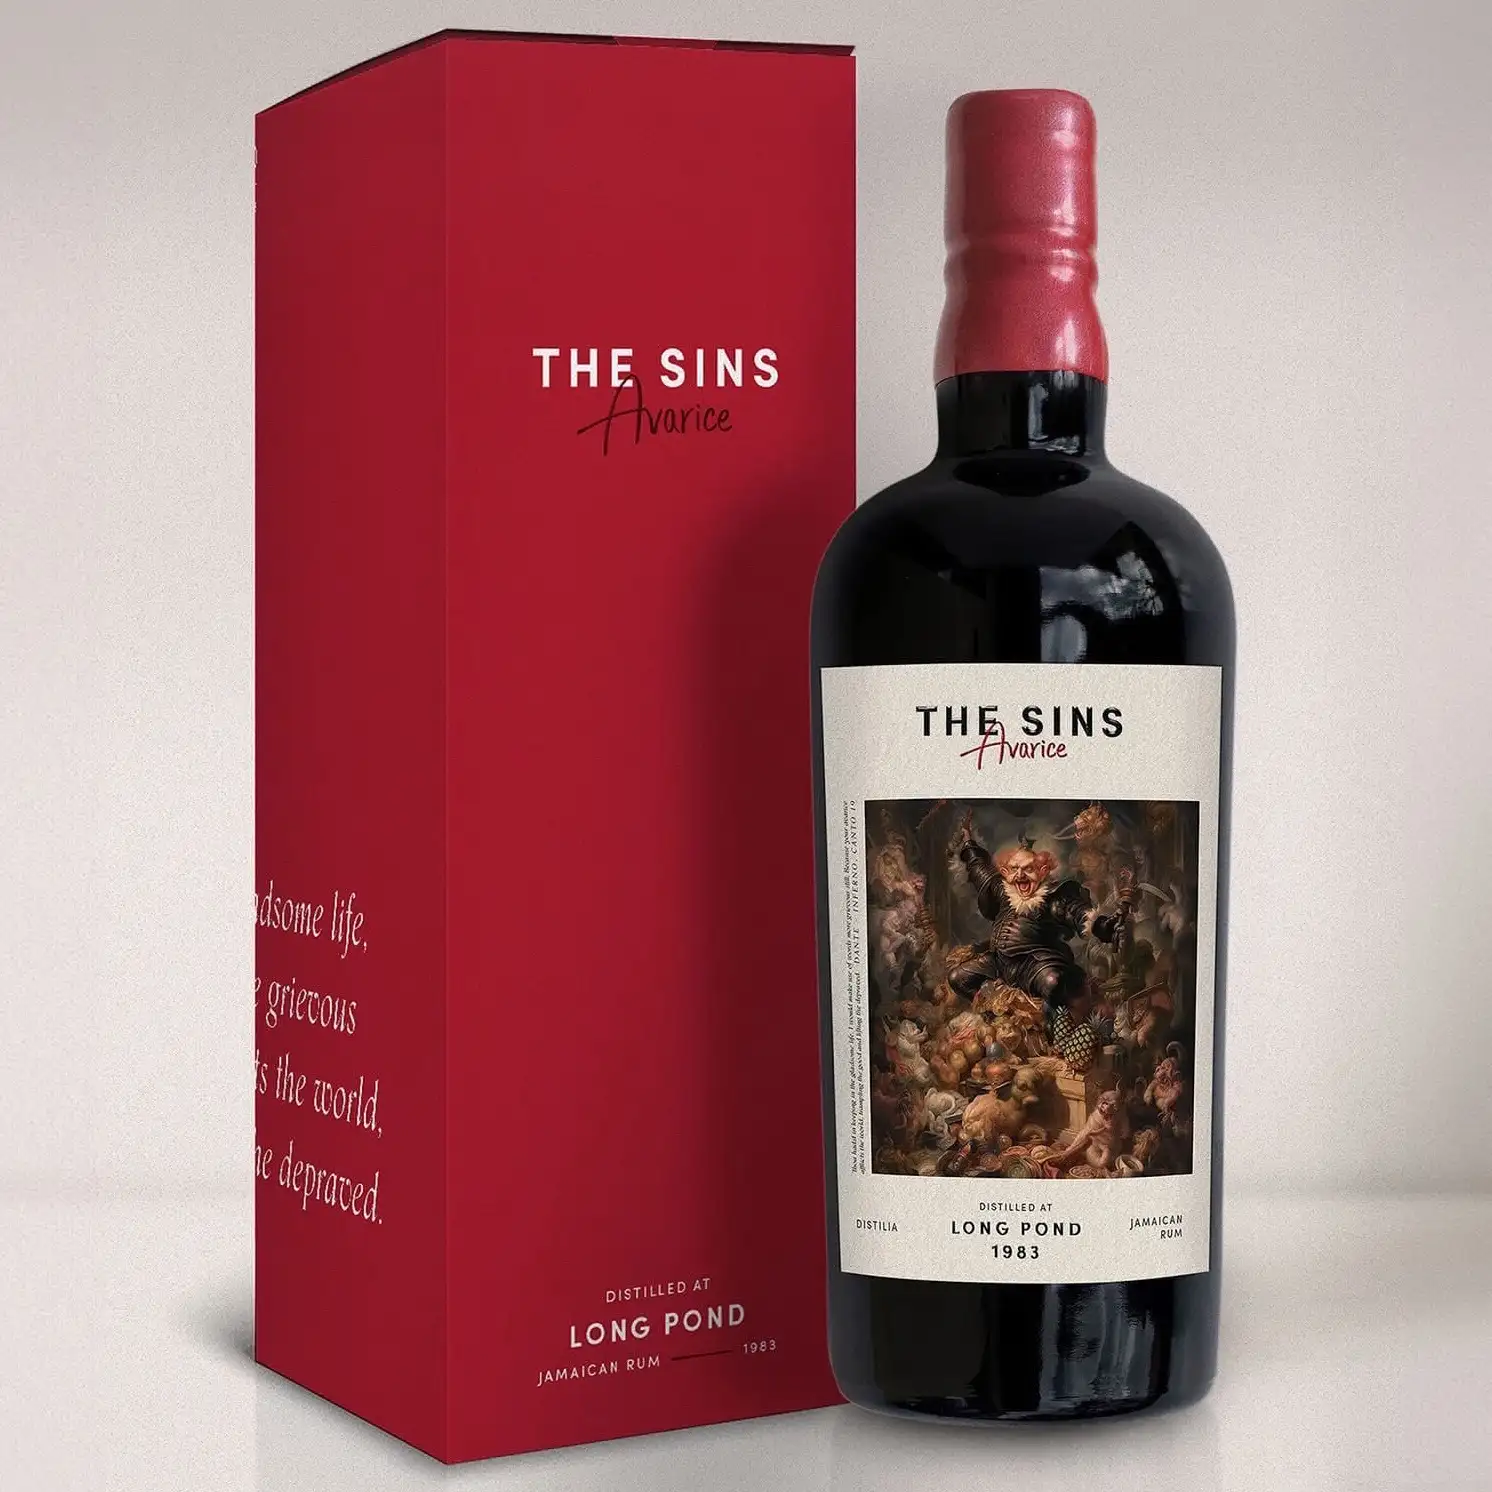 Image of the front of the bottle of the rum The Sins Avarice by Robert Bauer